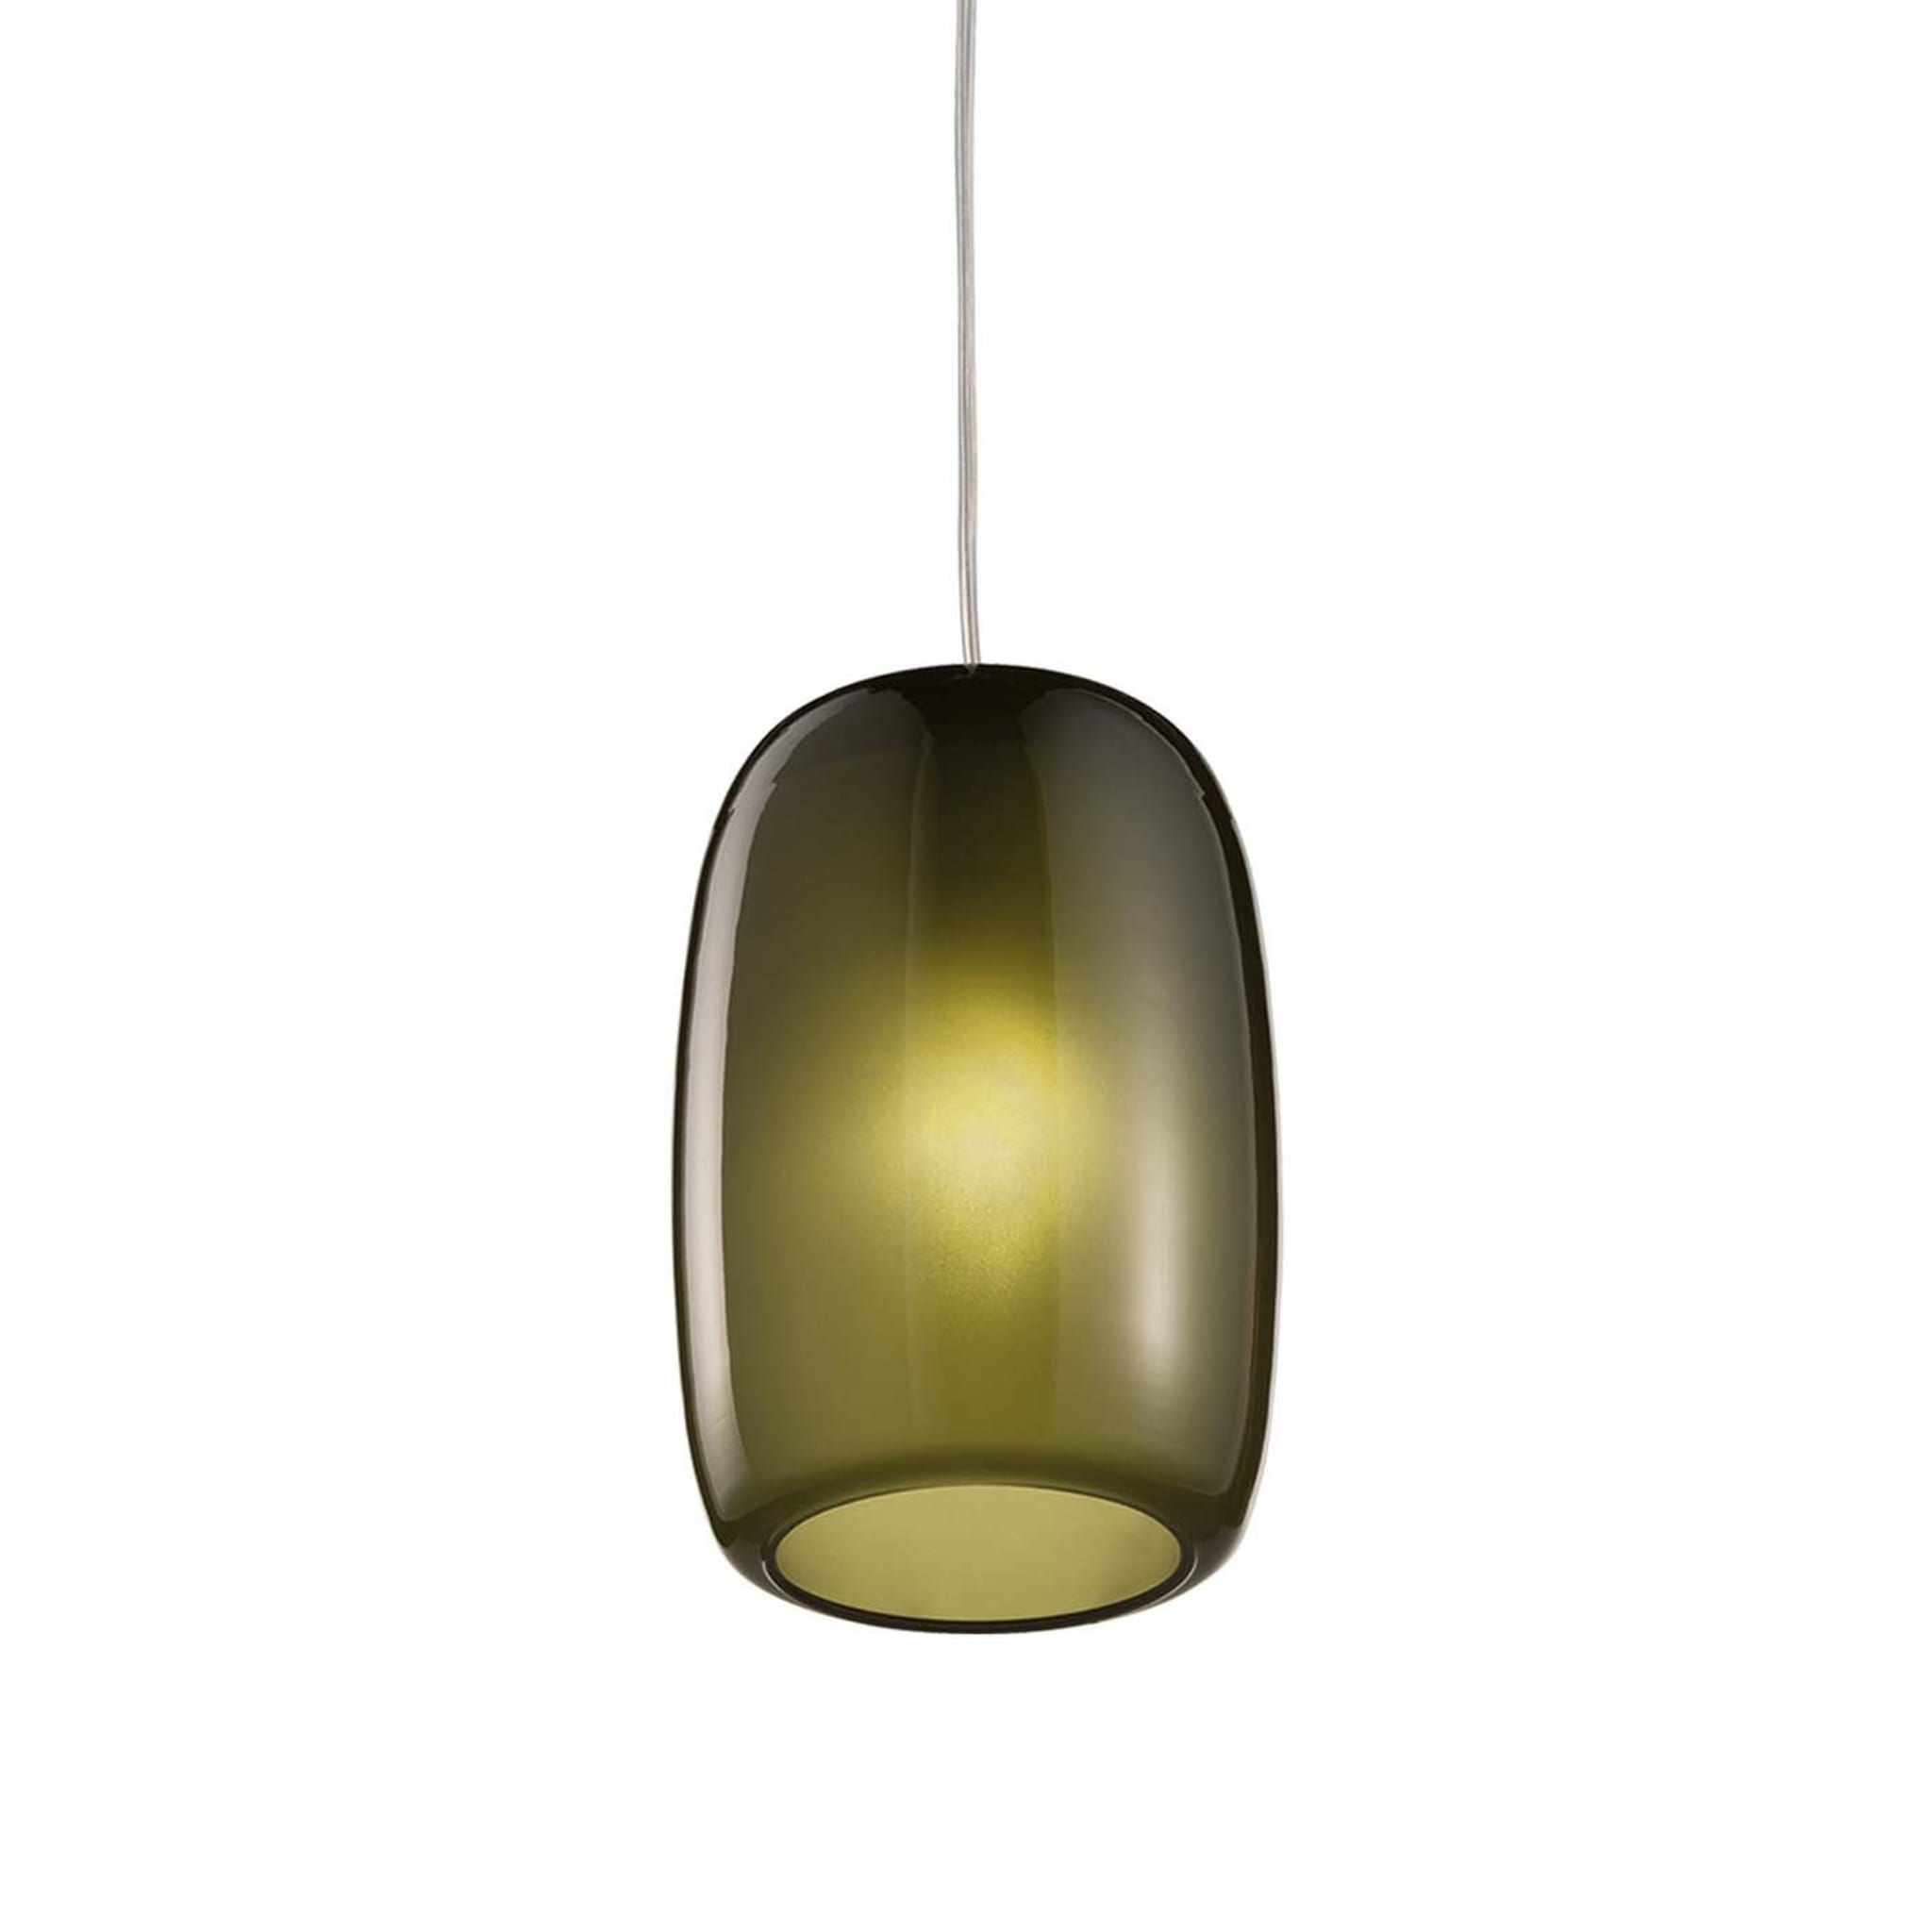 Forme cylindrical pendant light - Main view